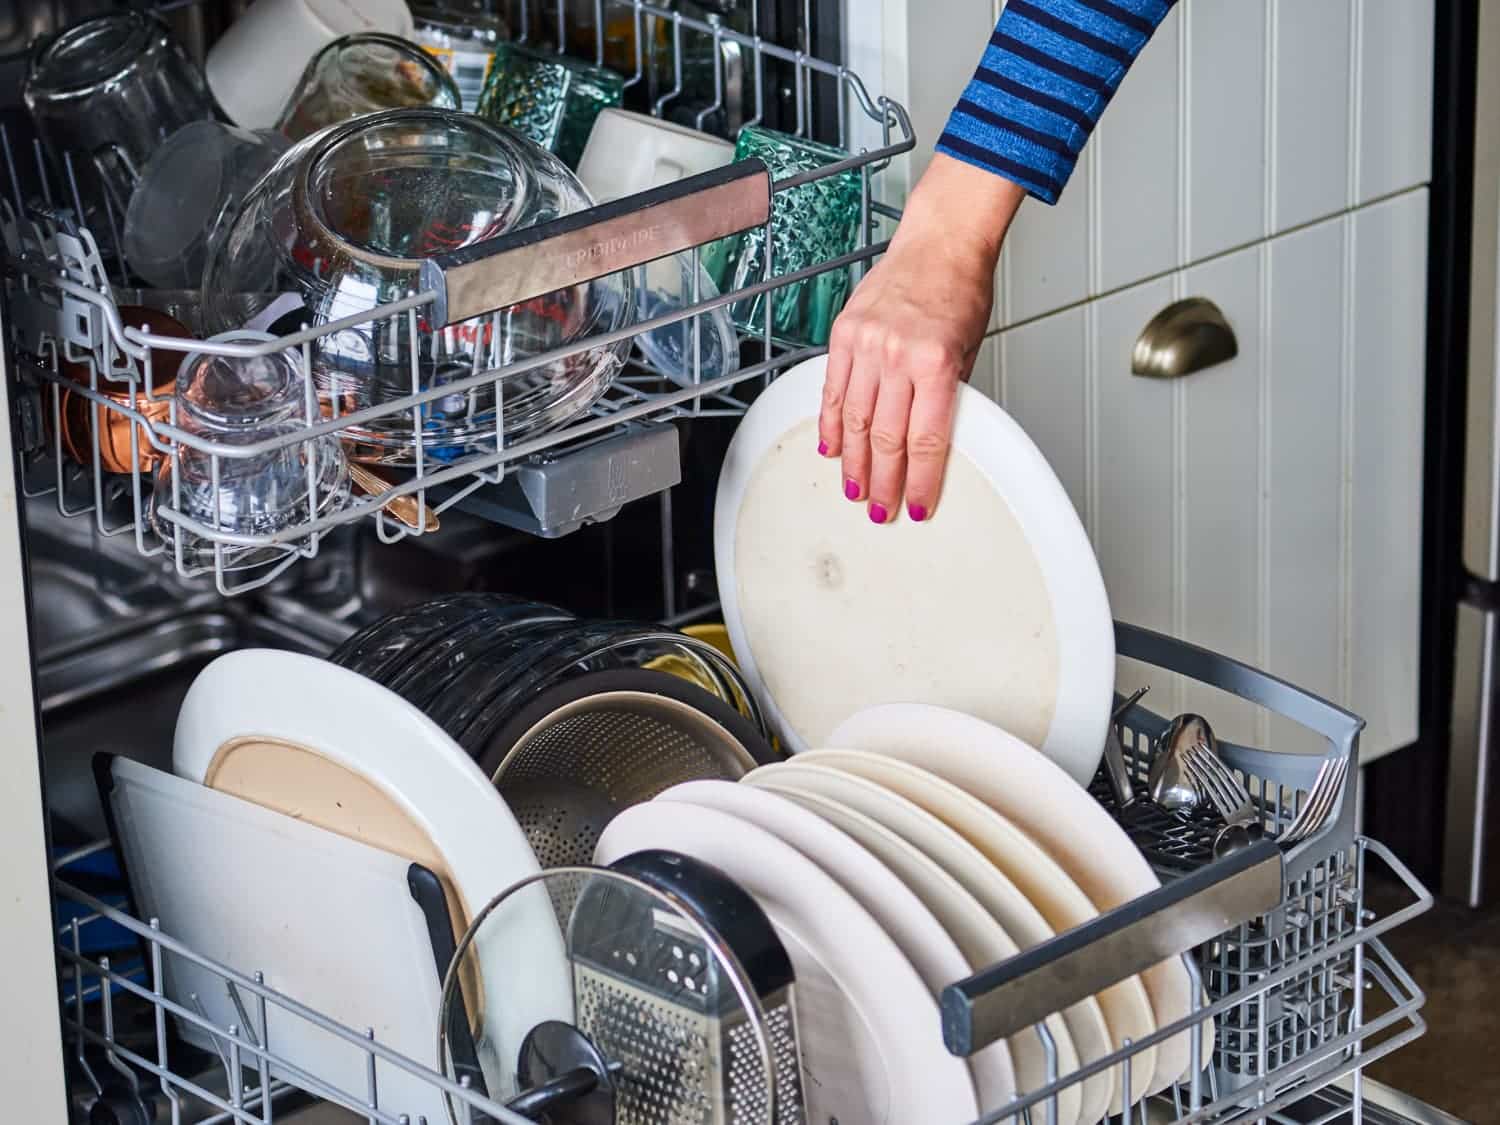 Troubleshooting Tips for Common Dishwasher Issues